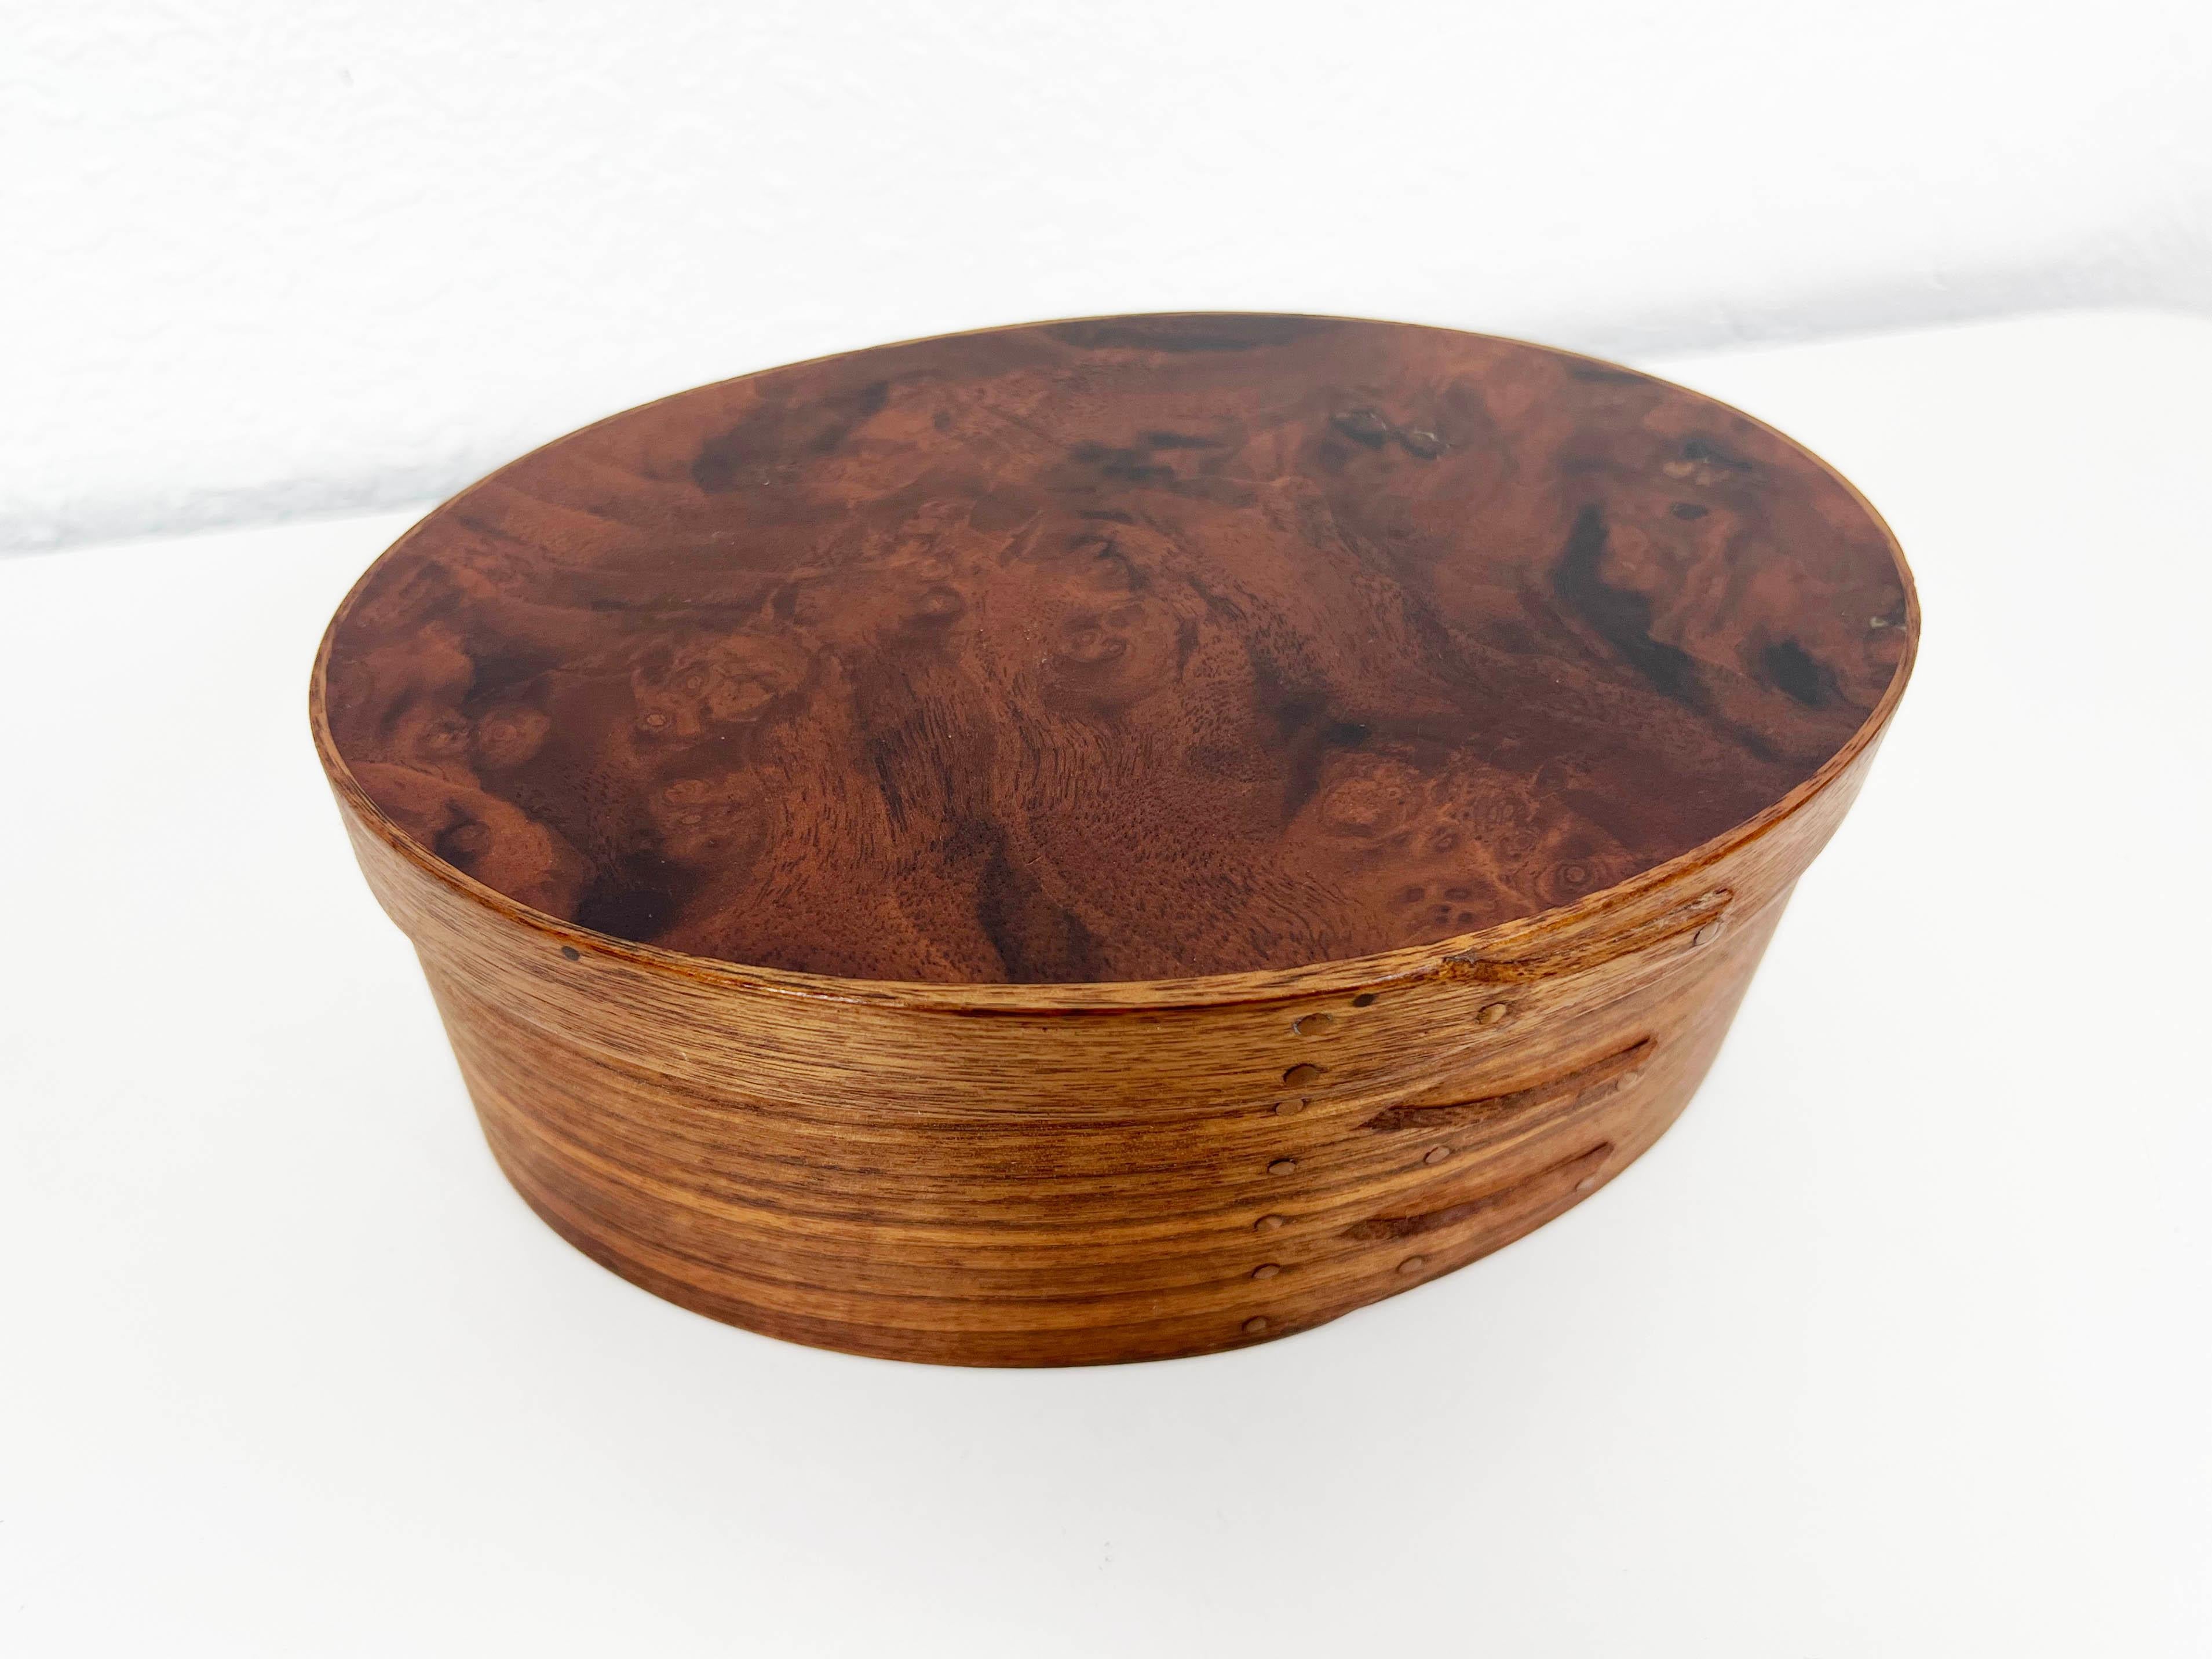 Vintage hand made lidded oval box crafted in teak and walnut burl wood with copper nail detail. Signed.

Dimensions: 7.5